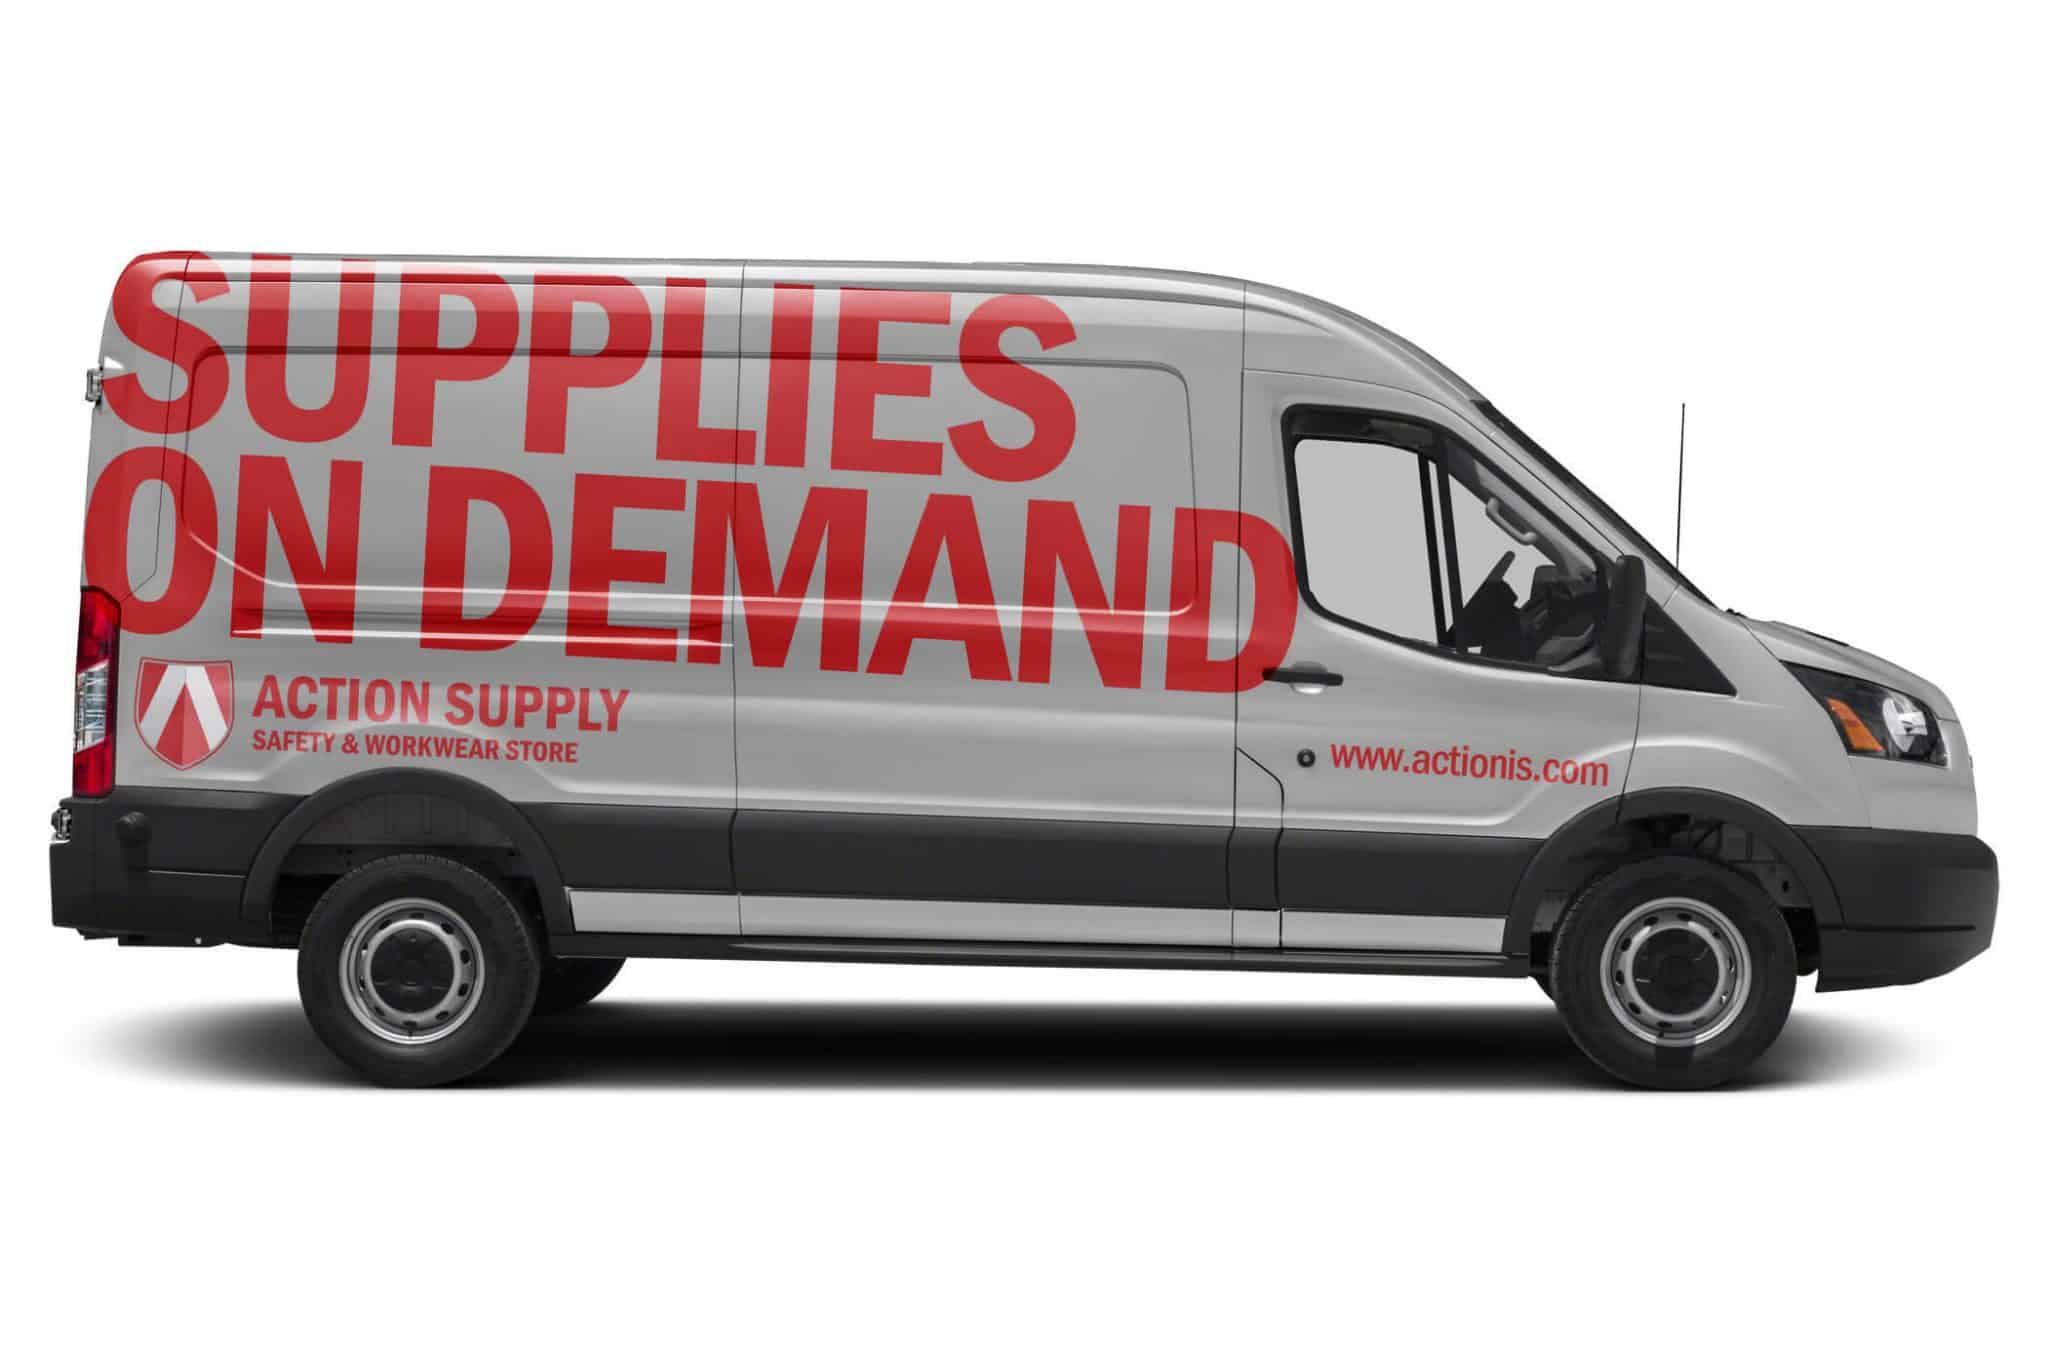 Action Supply Delivery Van showing "supplies on Demand" tag line